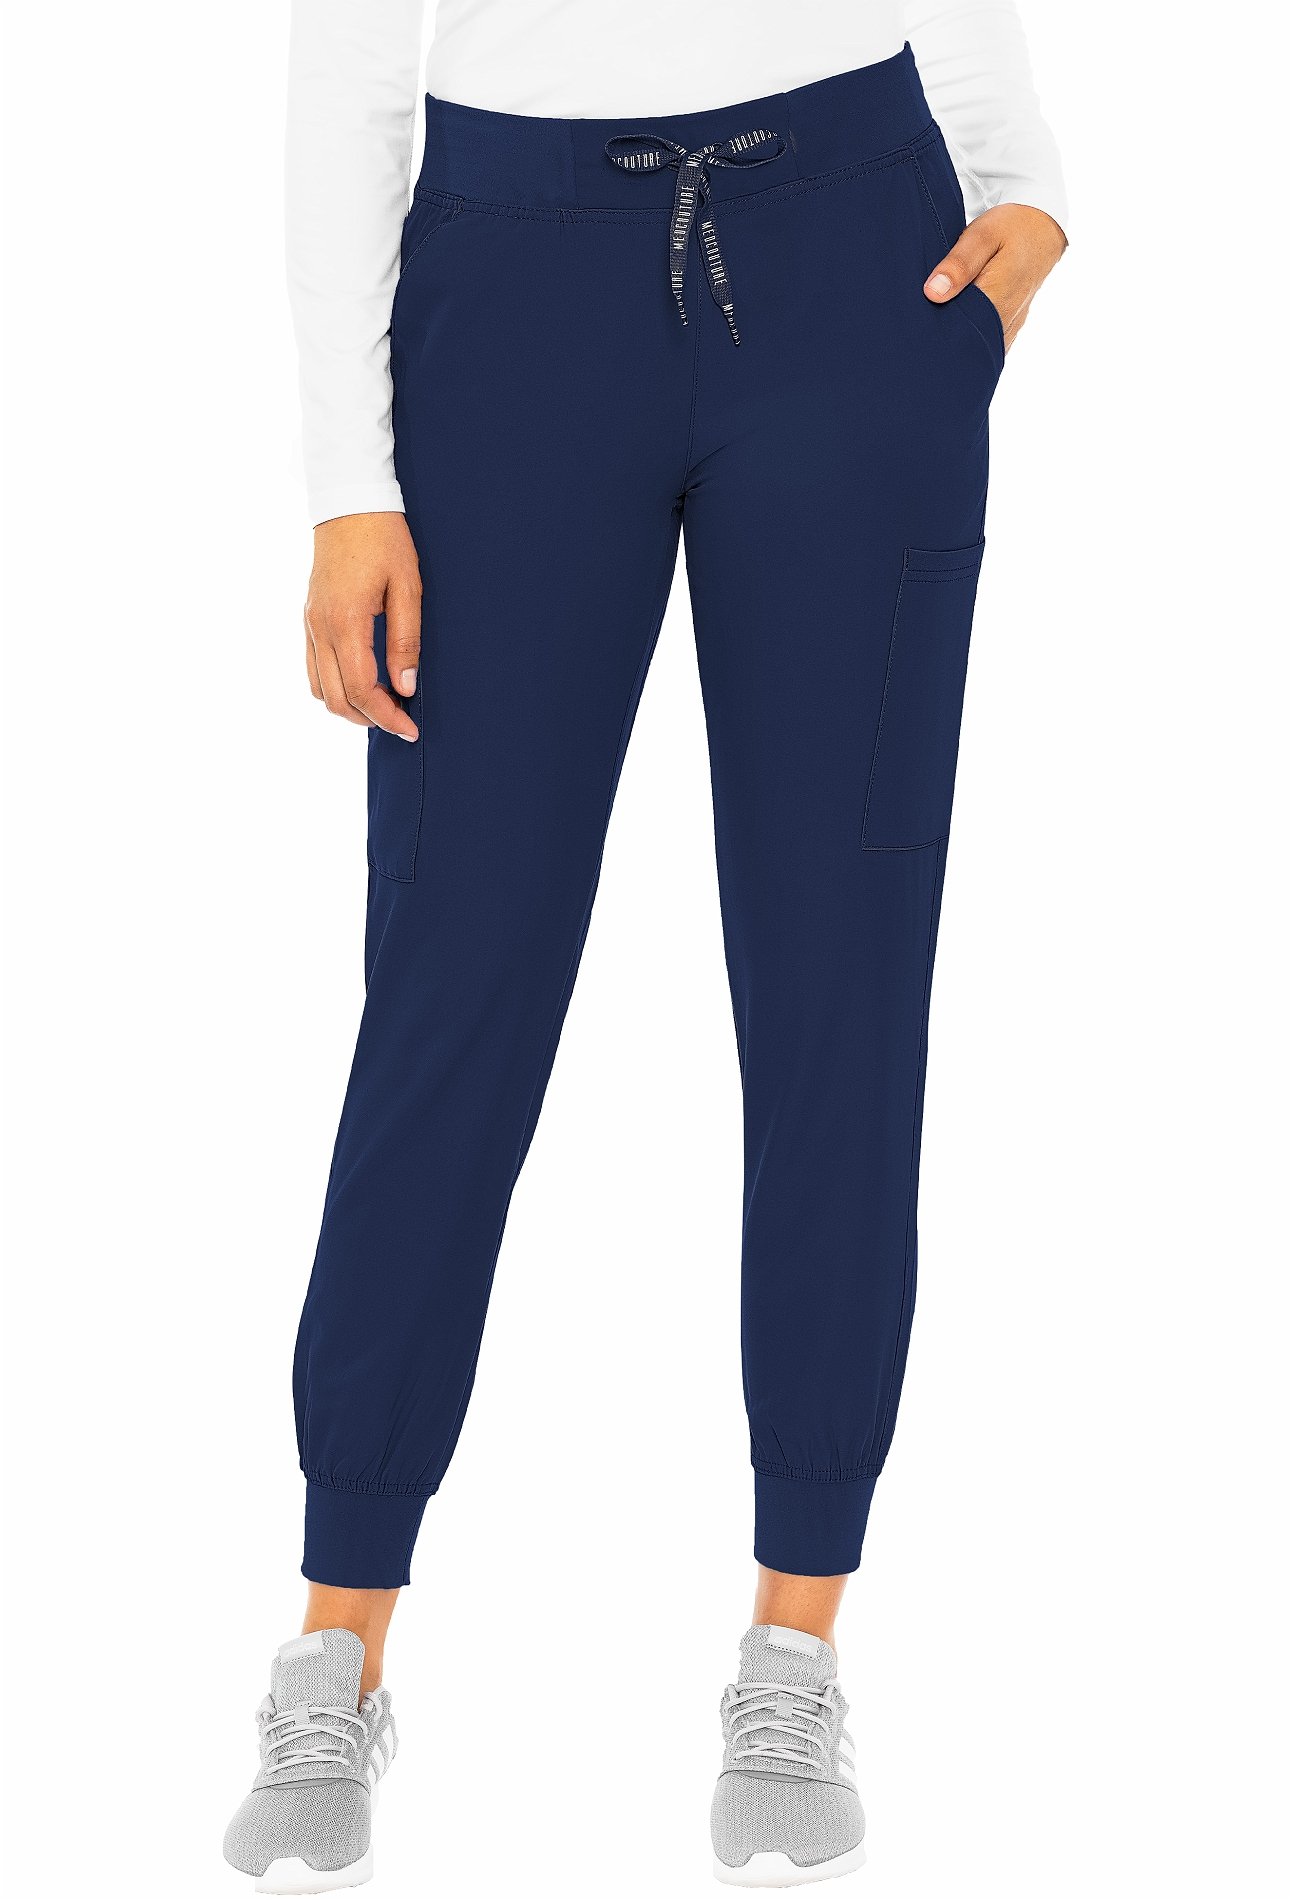 https://medicalscrubscollection.com/content/images/thumbs/0638536_med-couture-insight-womens-jogger-scrub-pants-2711.jpeg